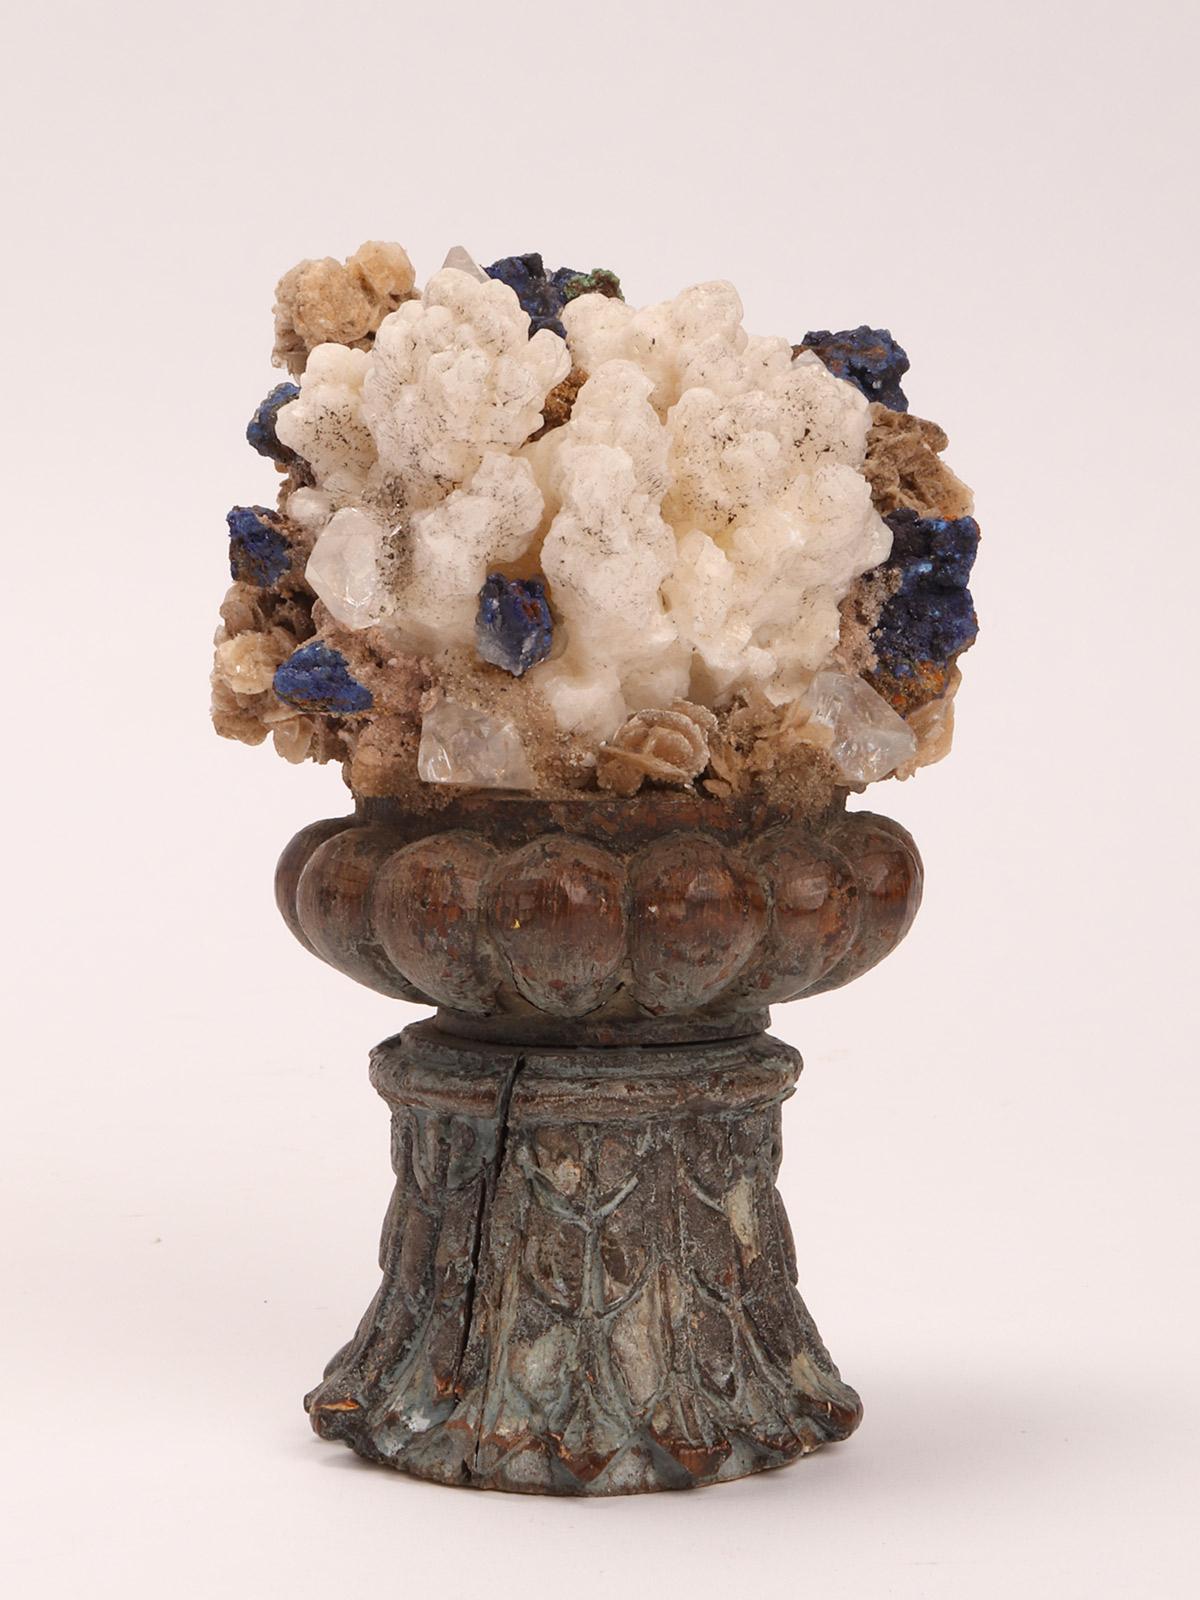 Italian A composition of calcite flower, blu quartz and rock crystals, Italy 1880. For Sale